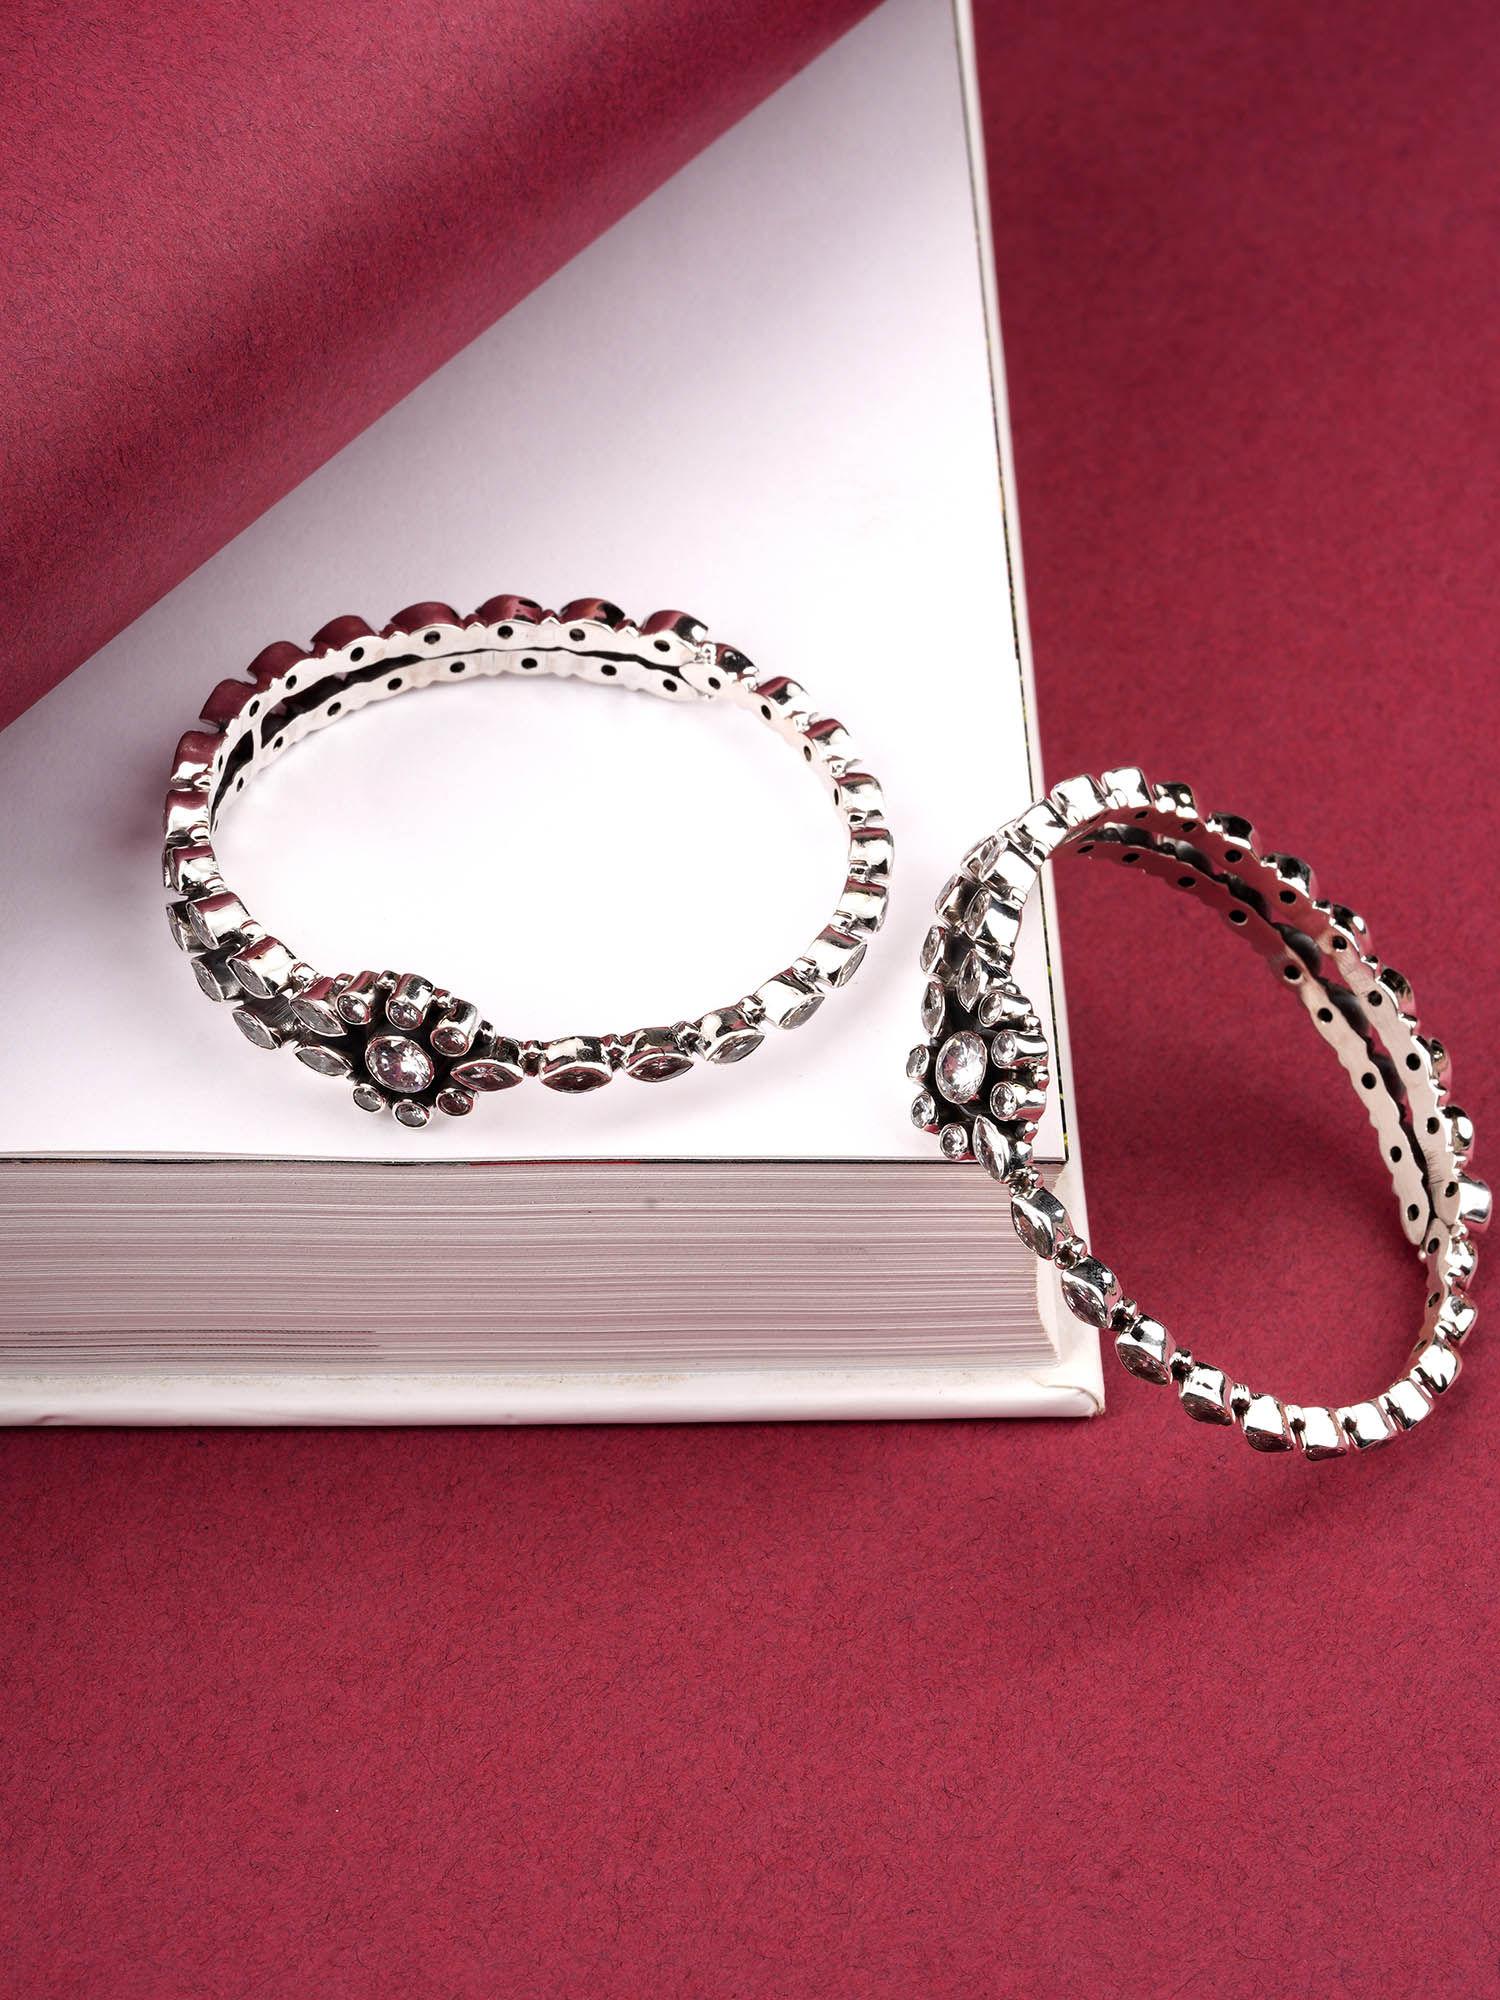 floral design in this bangle are crafted in silver with white checker